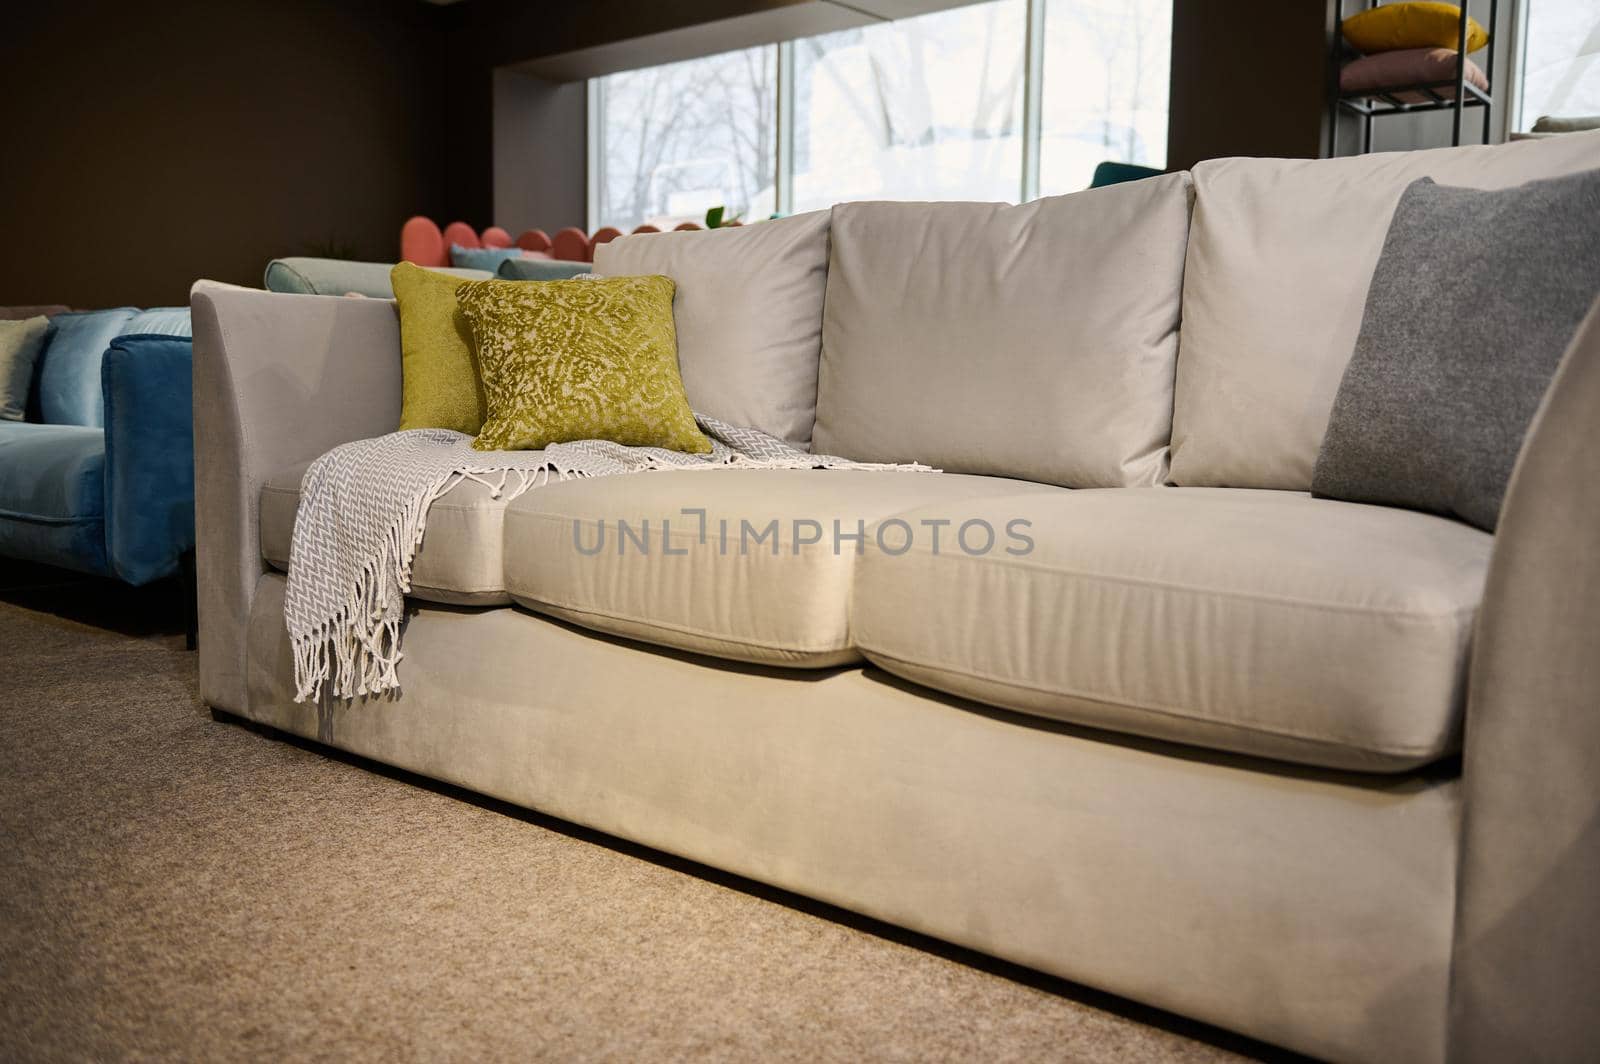 Comfortable upholstered velour beige couch with colored gray and green olive cushions displayed for sale in the furniture store showroom. Exhibition of upholstered furniture. by artgf